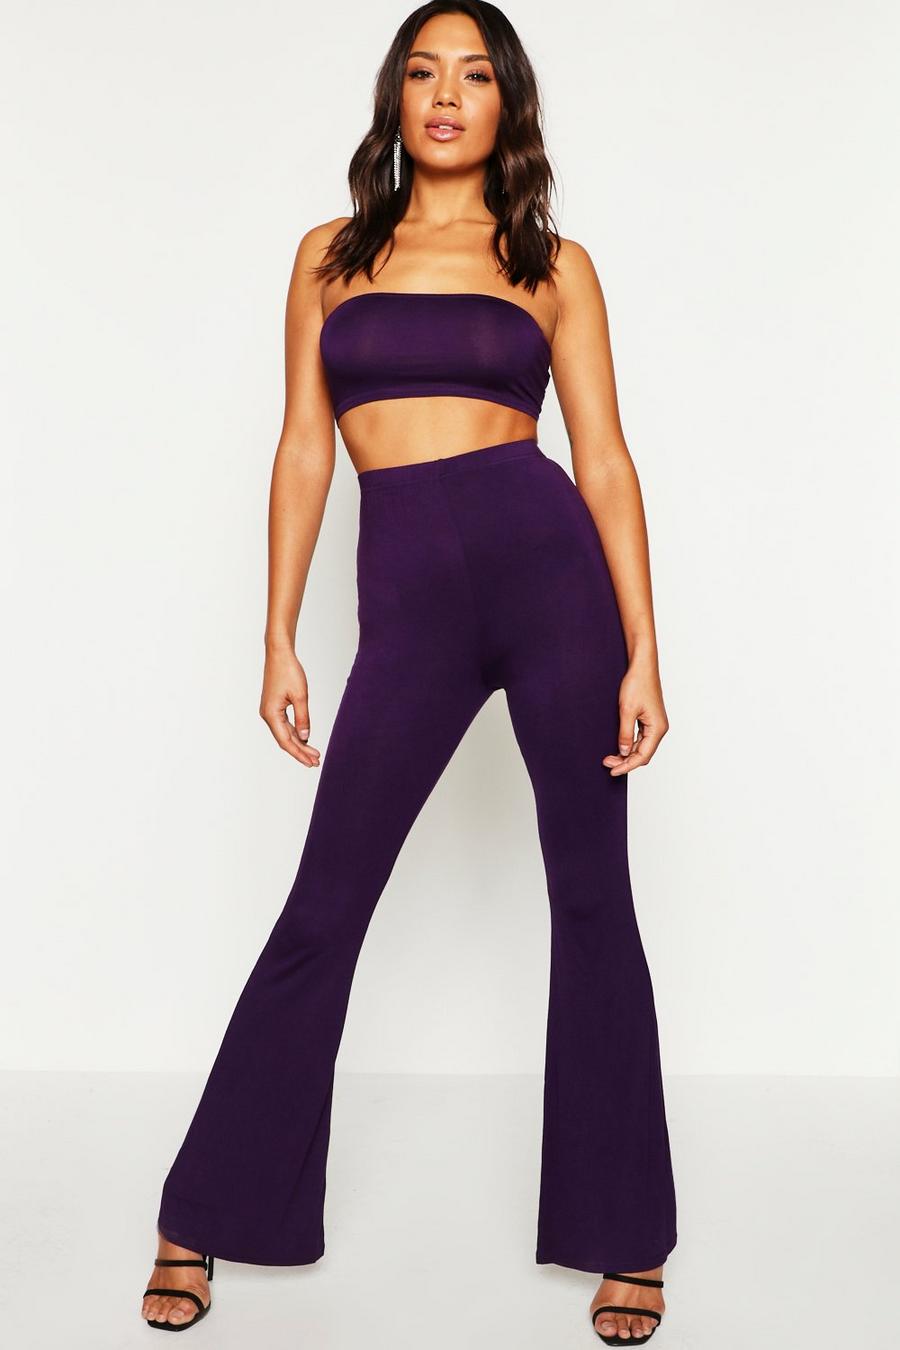 Jewel purple Basic Bandeau and Flared Trouser Co-ord Set image number 1